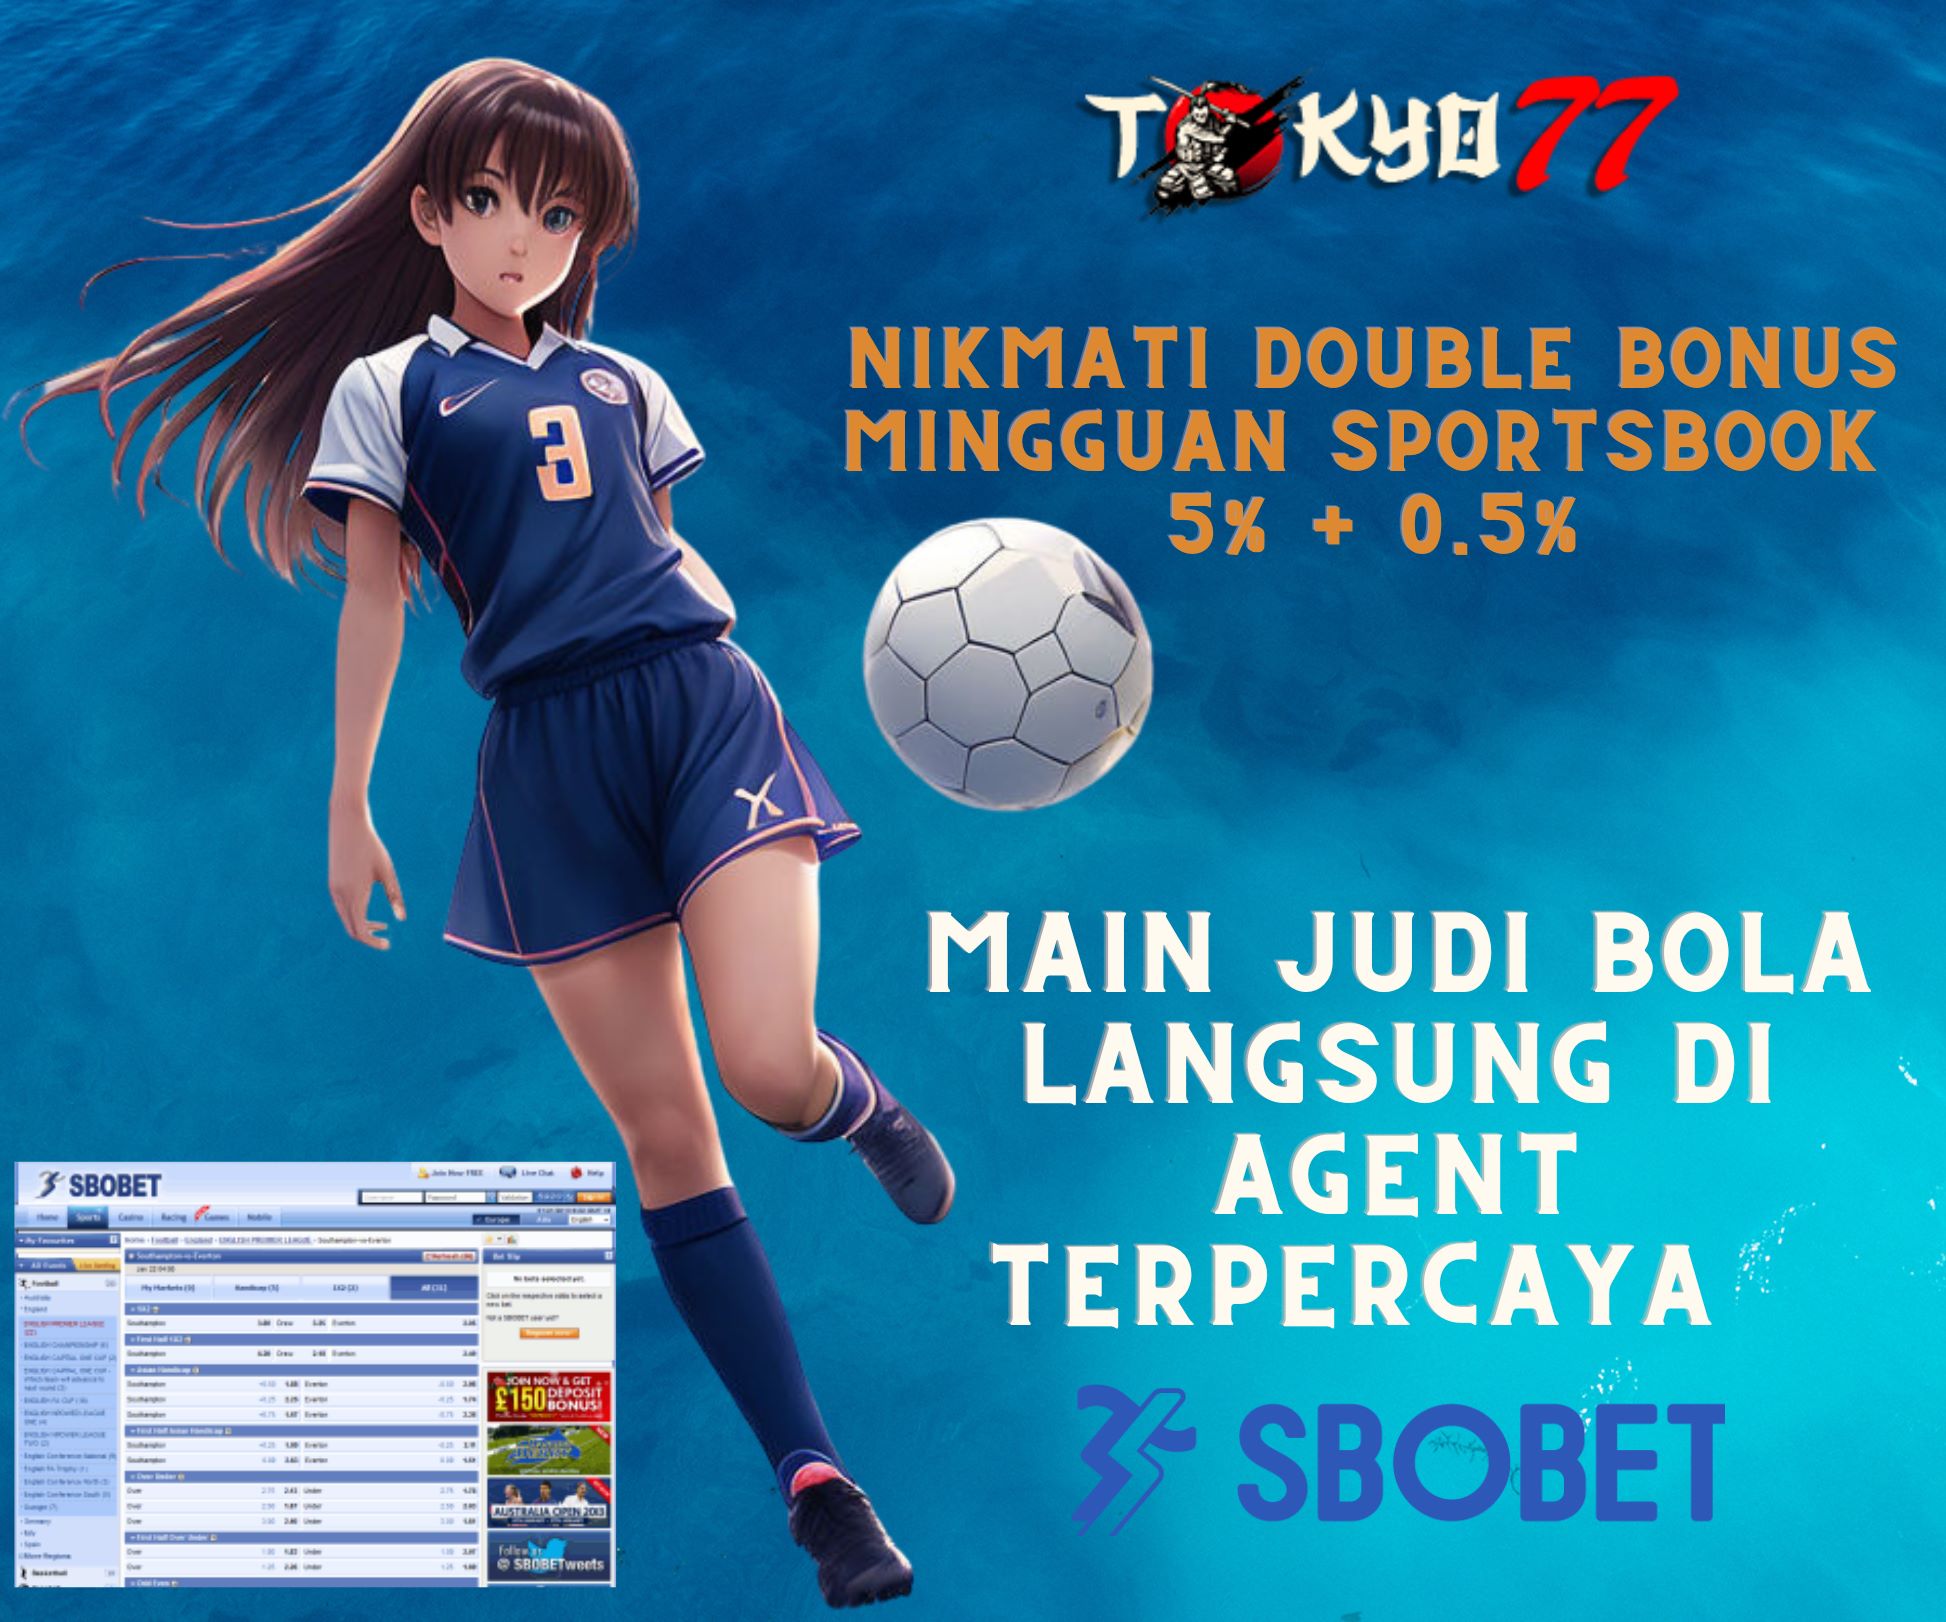 Types of Online Football Gambling Bets Available at Sbobet